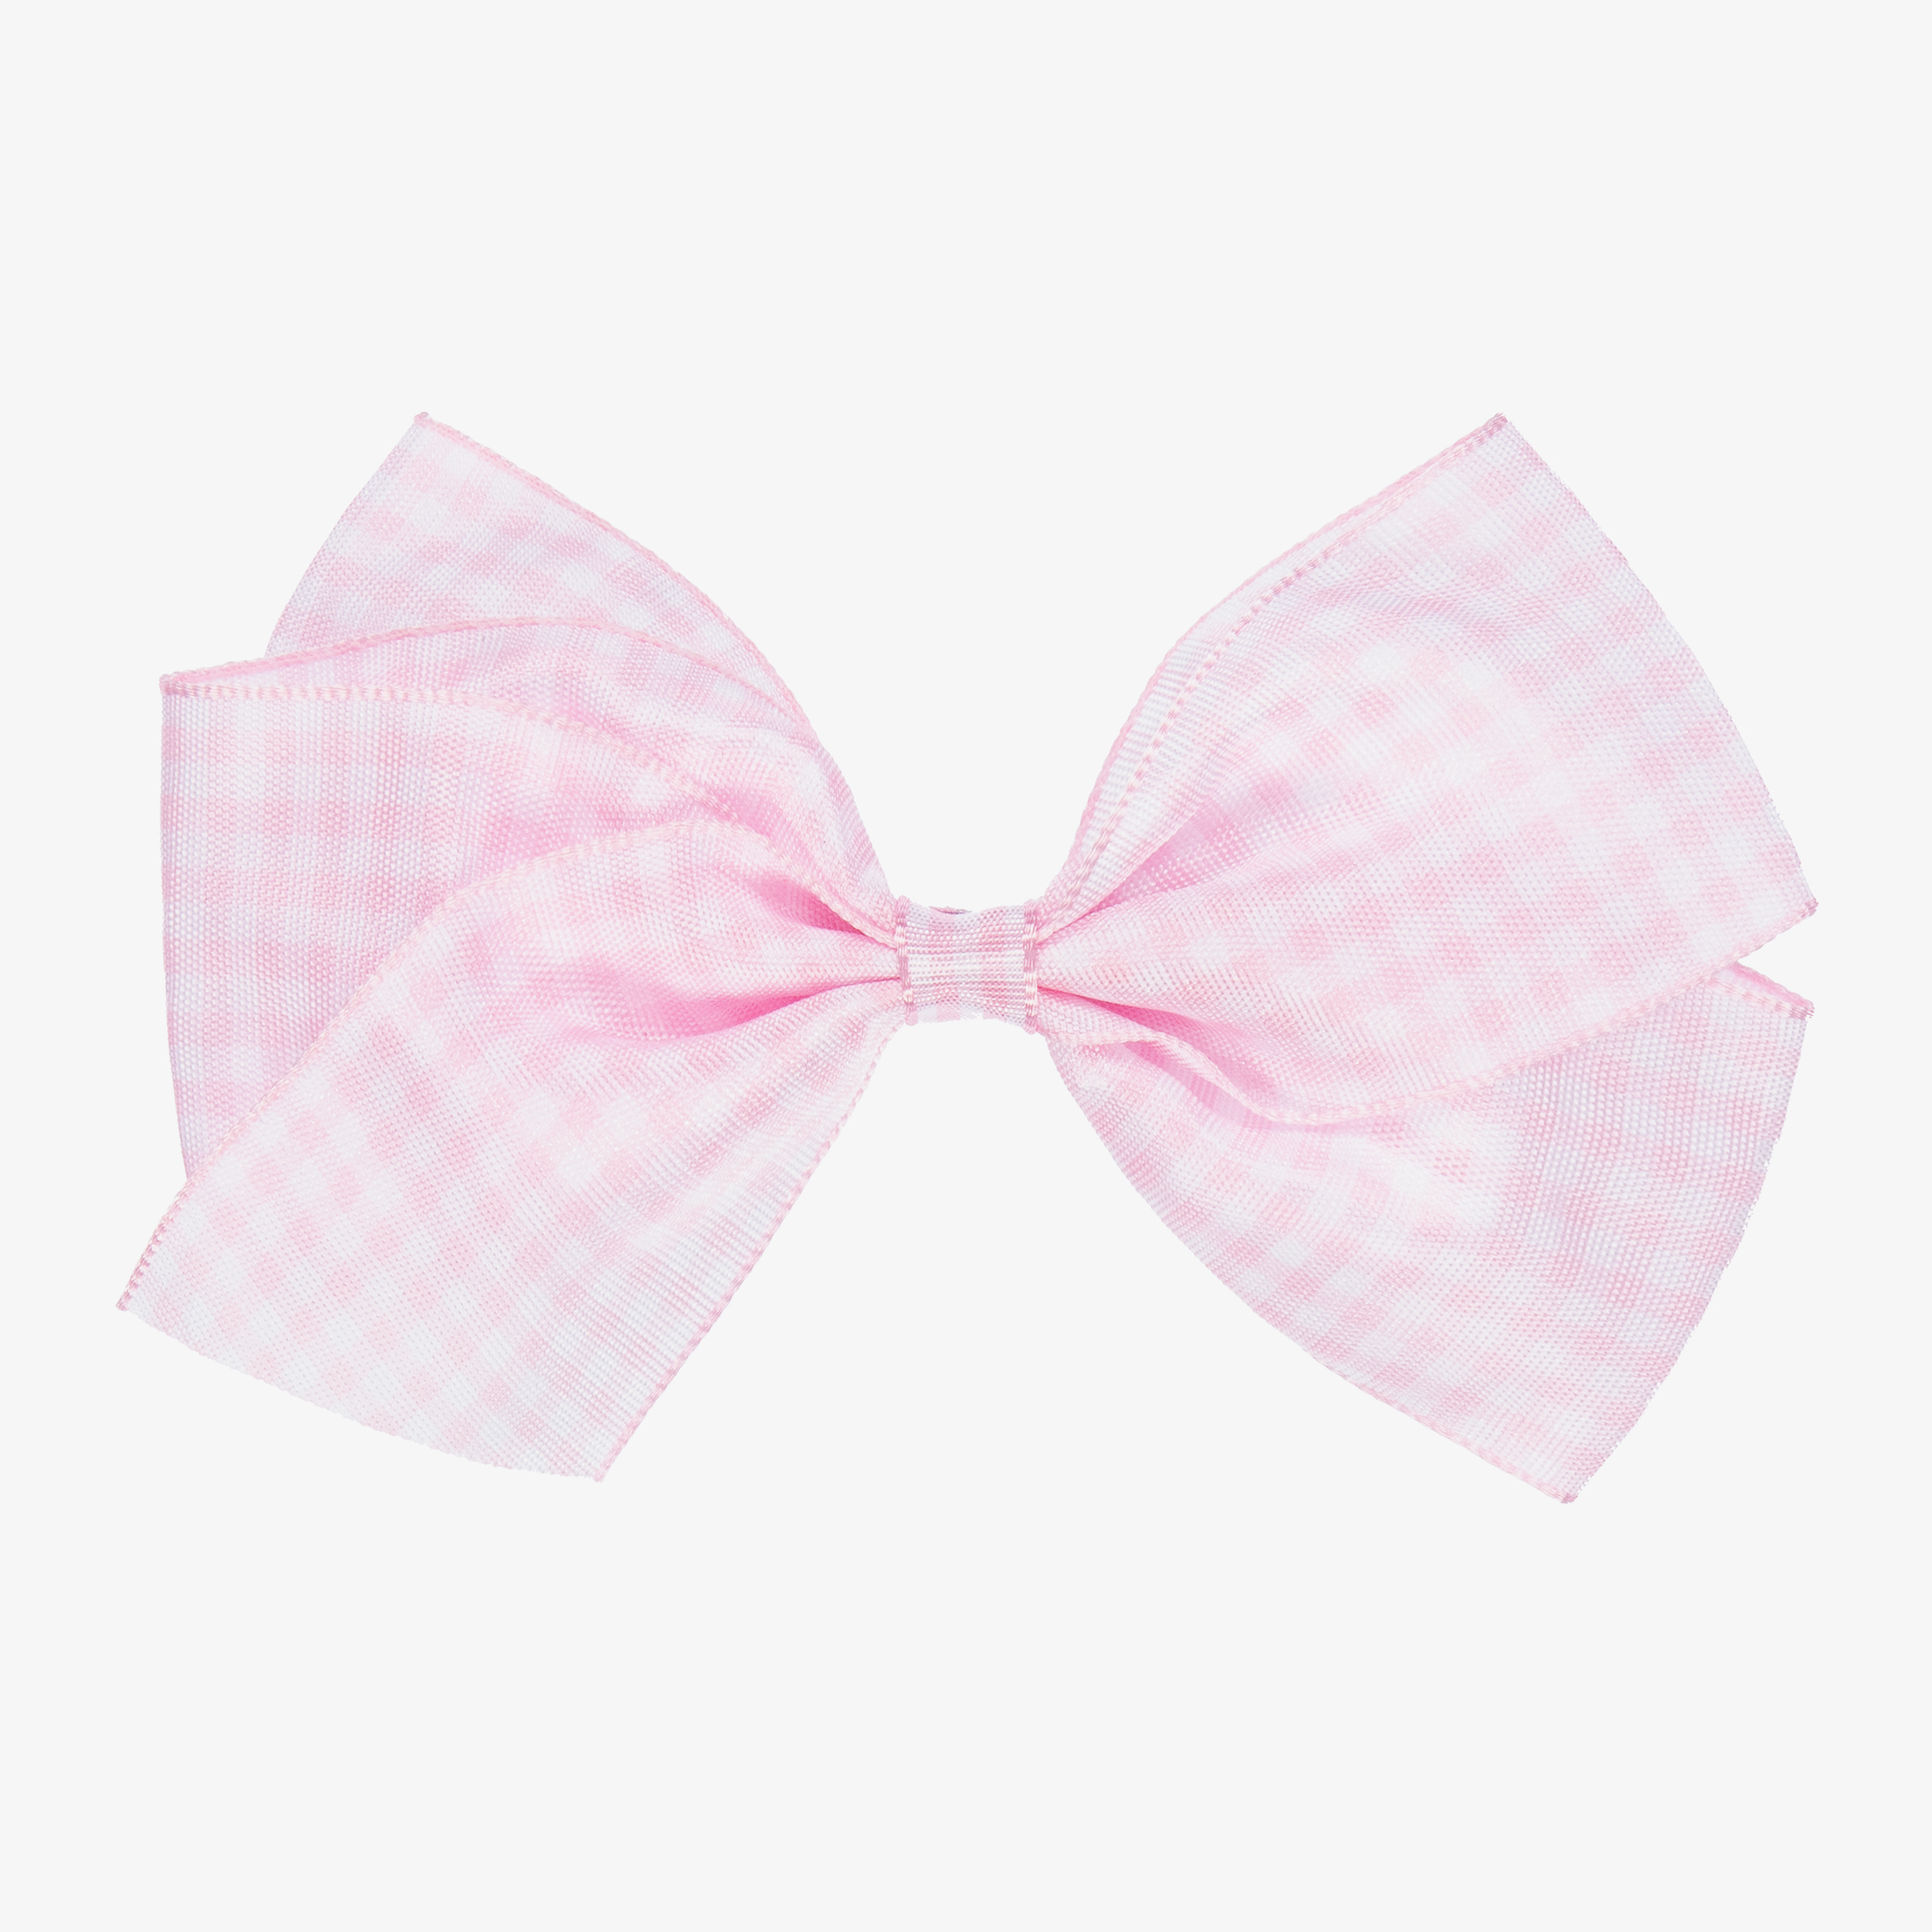 Sample Pink and White Gingham Ribbon